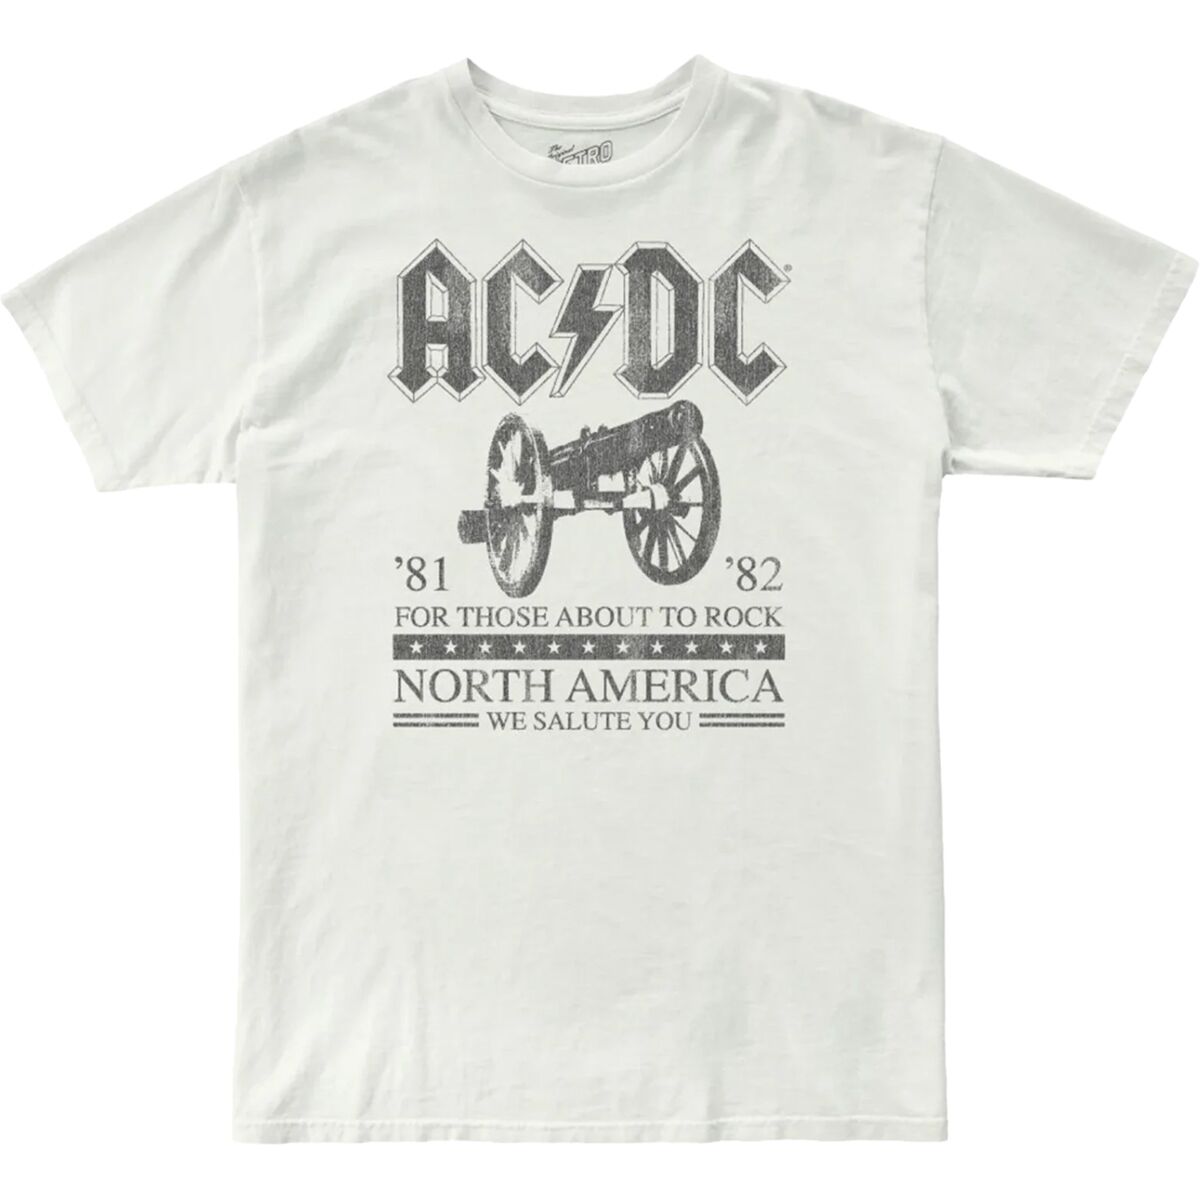 Original Retro Brand Acdc About To Rock North America T-Shirt